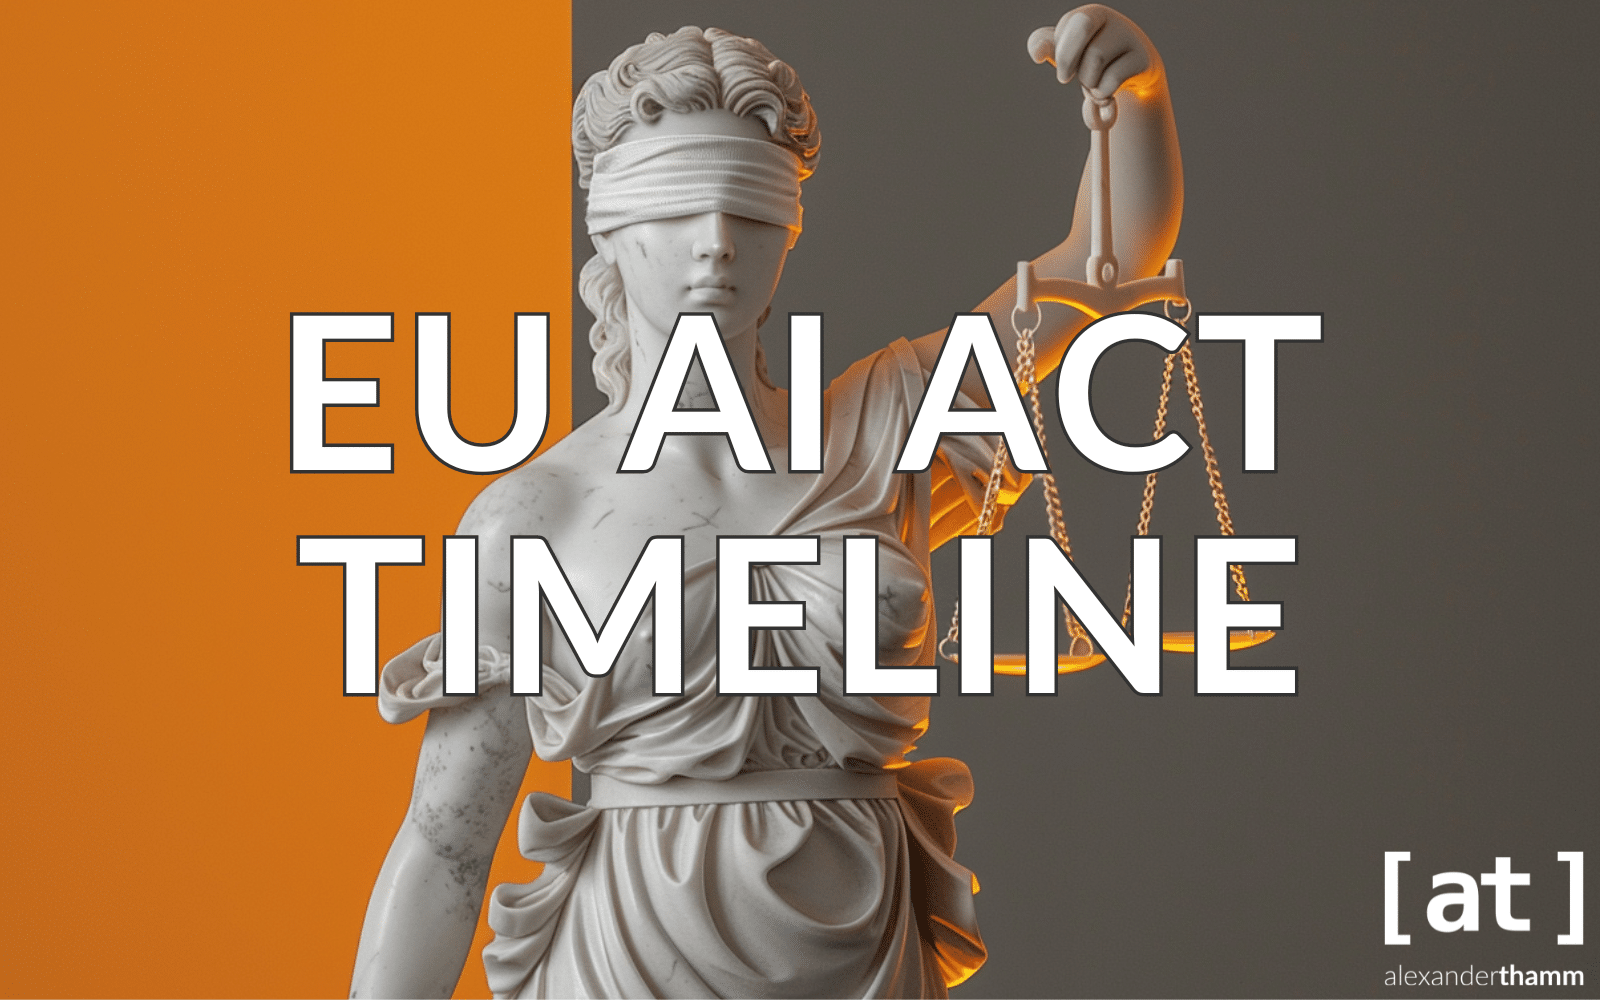 EU AI Act Timeline, a figure of Justitia with a blindfold and her scales against an orange-grey background